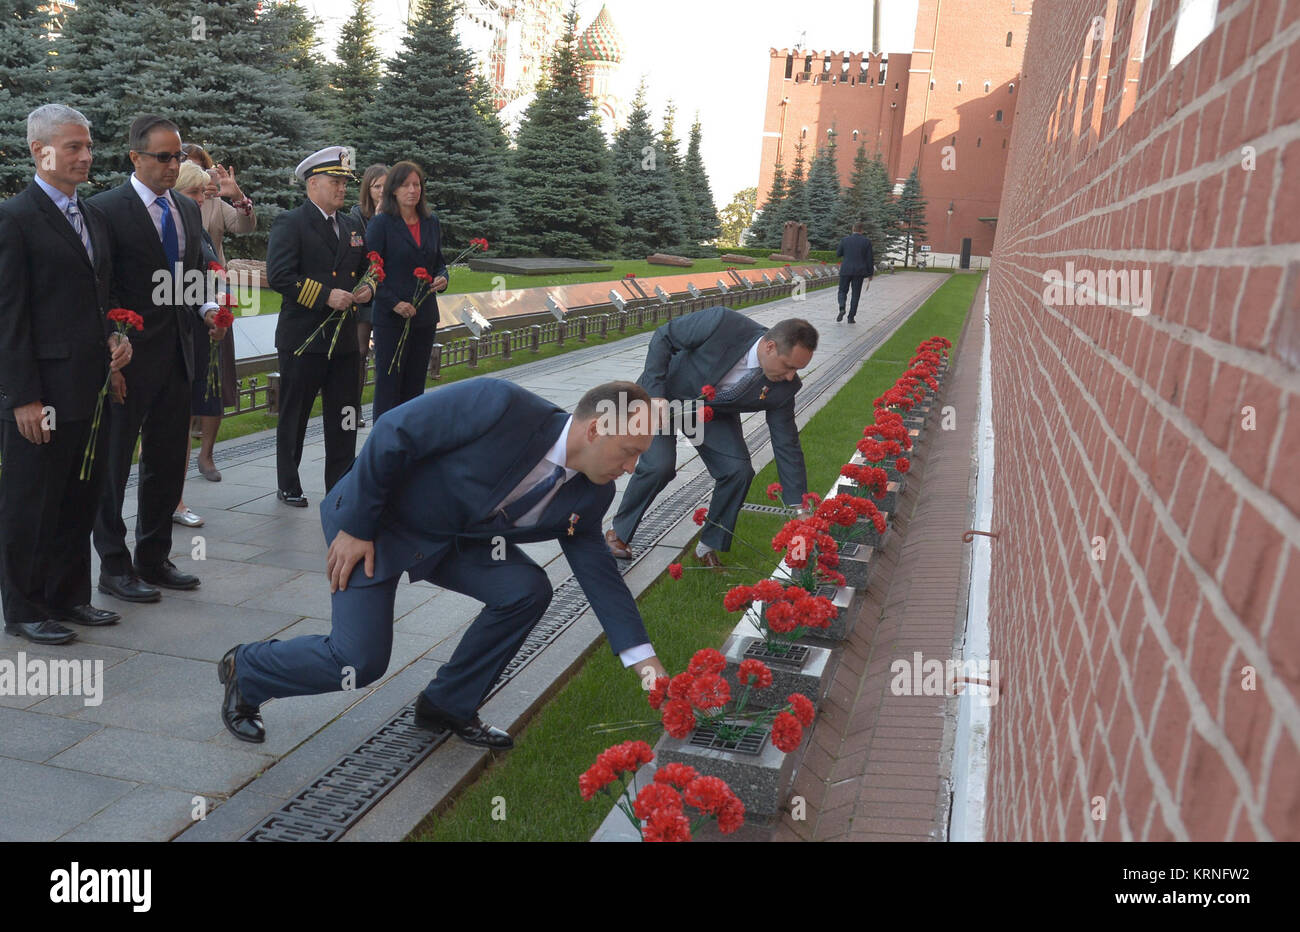 Expedition 53-54 prime crewmember Alexander Misurkin of Roscosmos (foreground) and his backup and fellow cosmonaut Anton Shkaplerov lay flowers at the Kremlin Wall in Red Square in Moscow Sept. 1 as part of traditional pre-launch ceremonies. Misurkin and Joe Acaba and Mark Vande Hei of NASA will launch Sept. 13 from the Baikonur Cosmodrome in Kazakhstan Sept. 13 on the Soyuz MS-06 spacecraft for a five and a half month mission on the International Space Station.  NASA/Elizabeth Weissinger Expedition 53 Red Square Visit - Kremlin Wall Necropolis (JSC2017-E-114488) Stock Photo